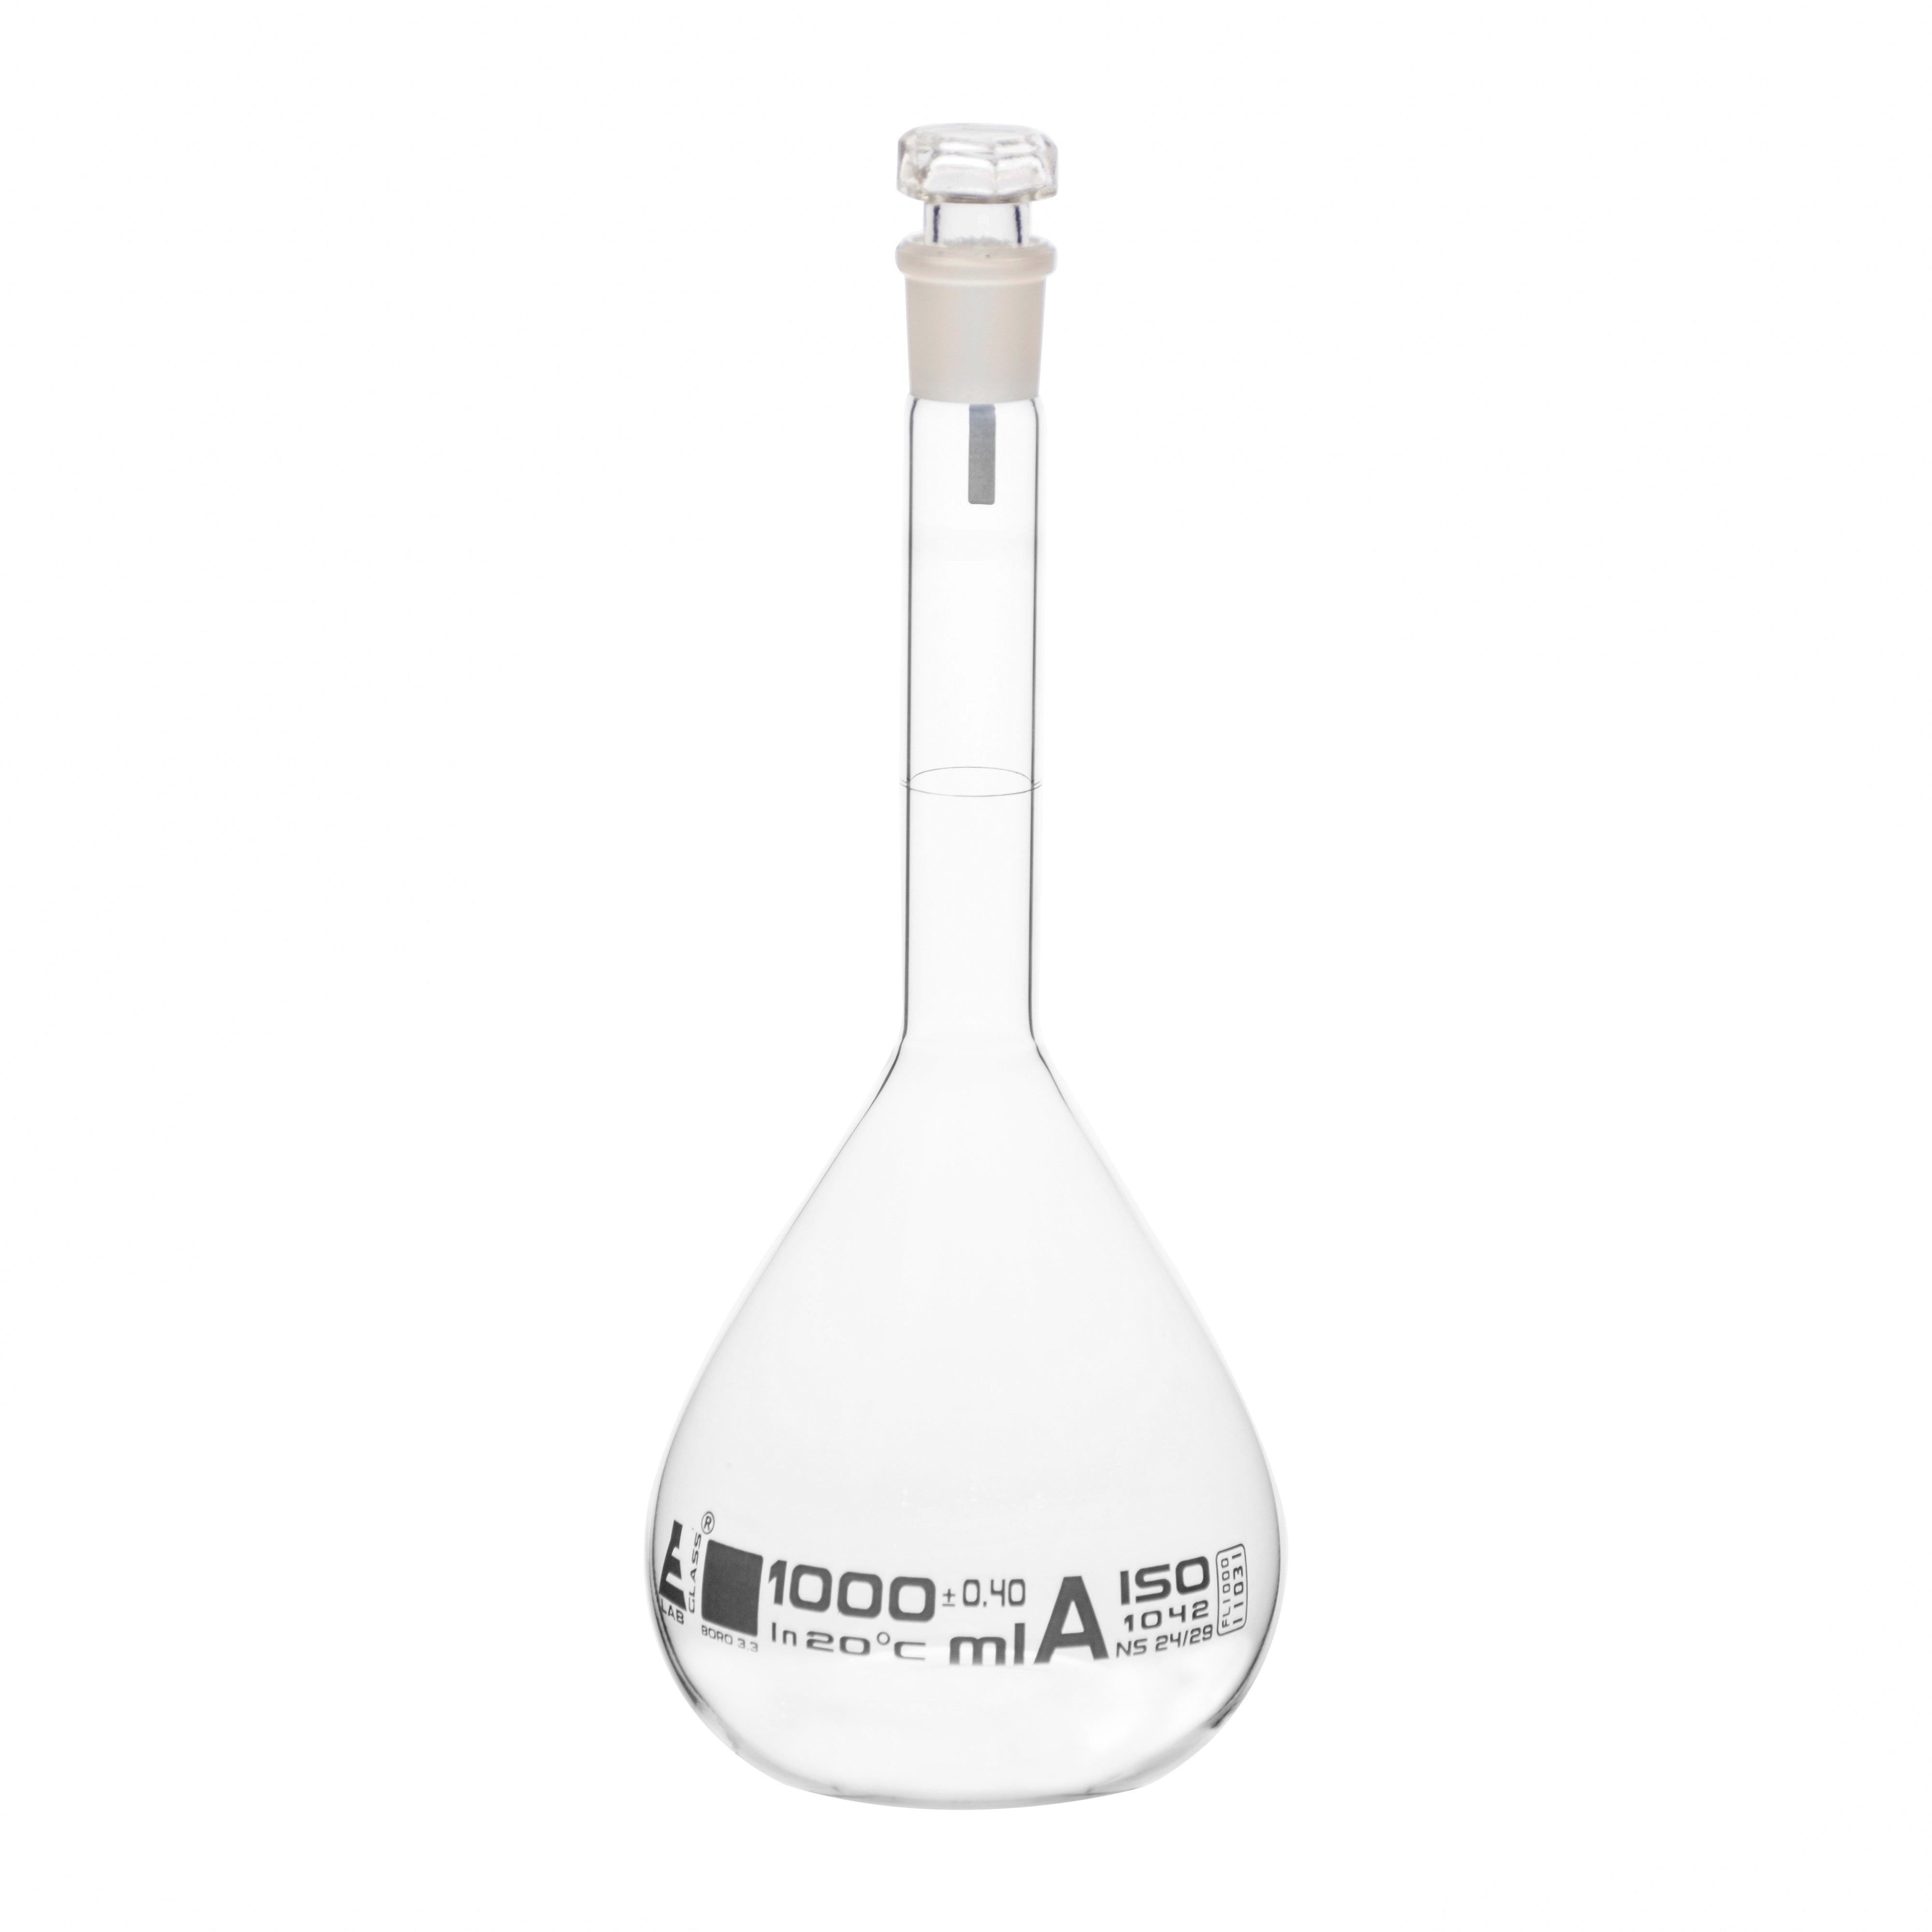 Borosilicate Volumetric Flask with Hollow Glass Stopper, 1000ml, Class A, White Print, Autoclavable